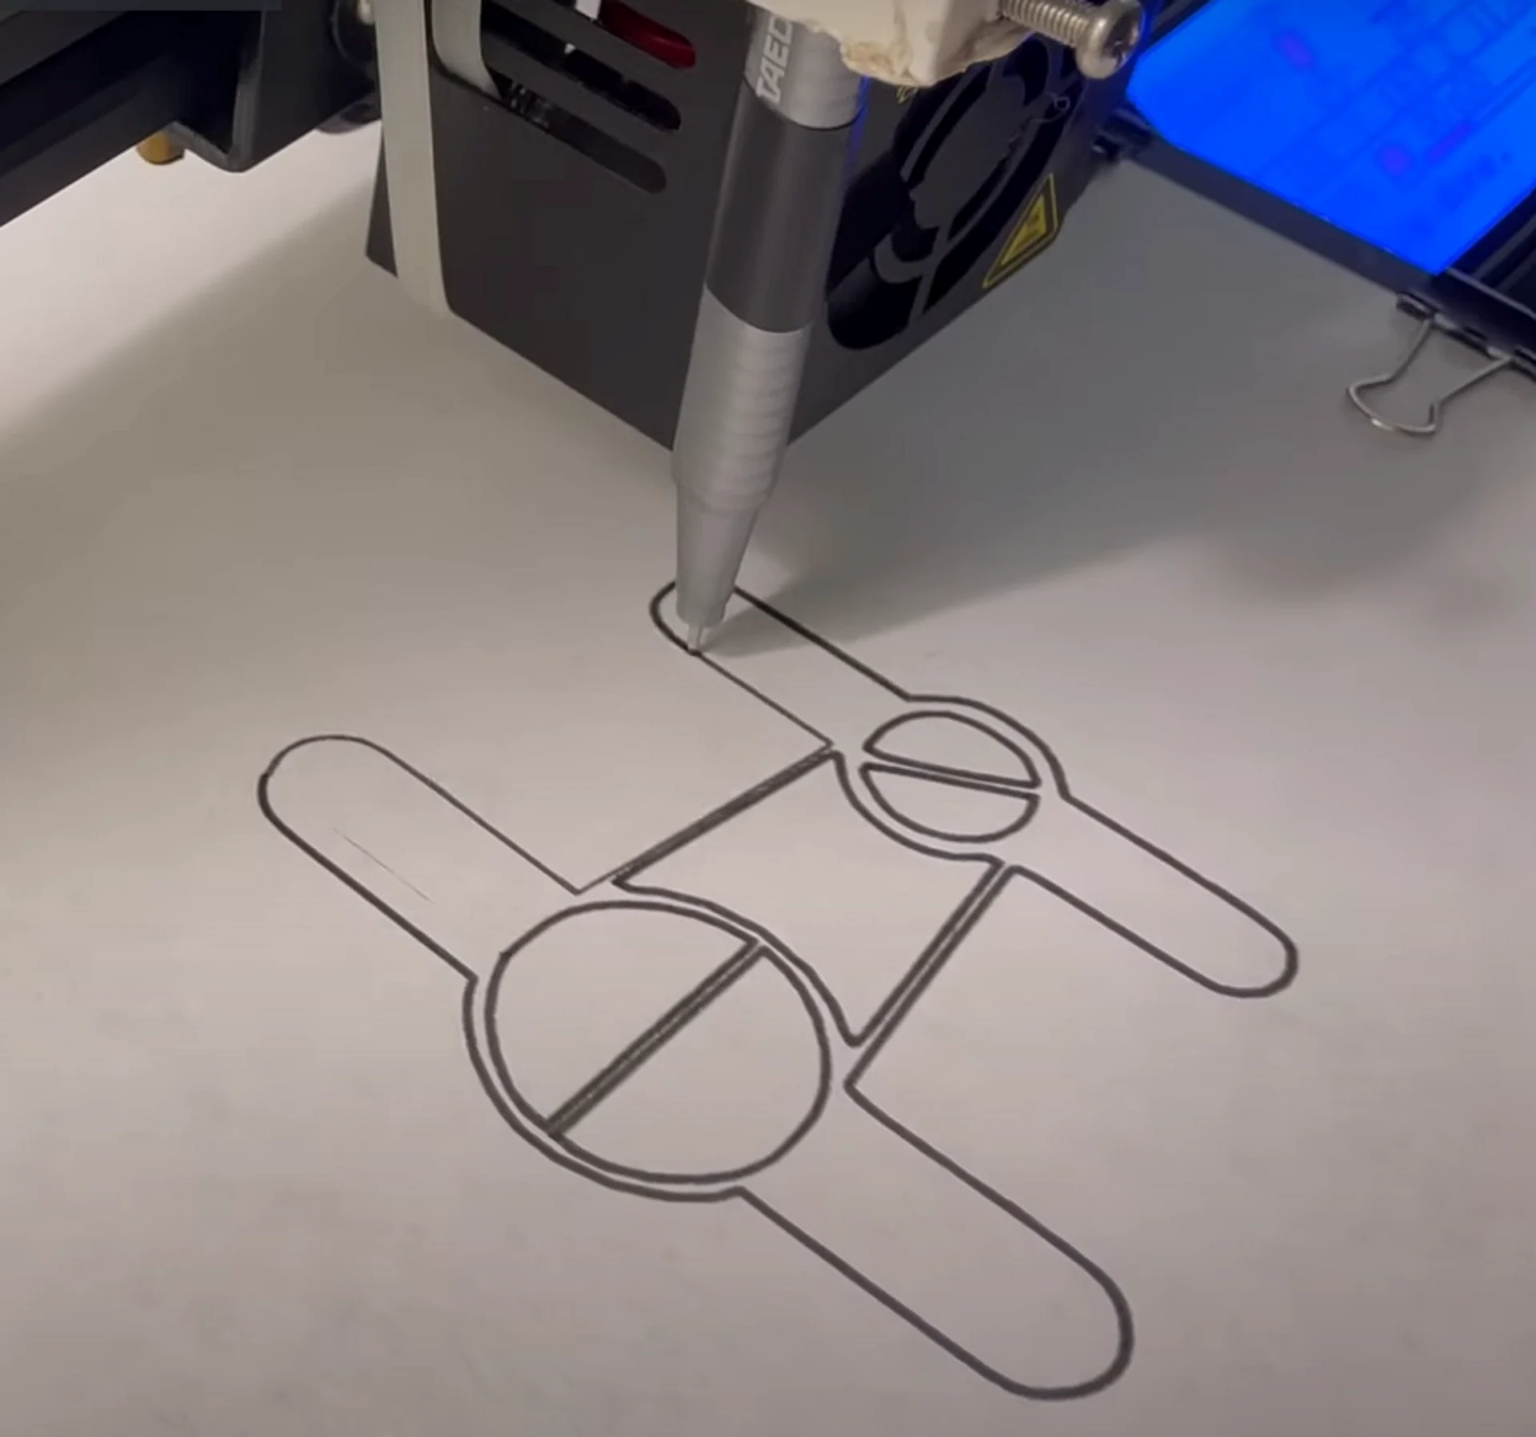 How I Turned My 3D Printer Into a 2D Plotter